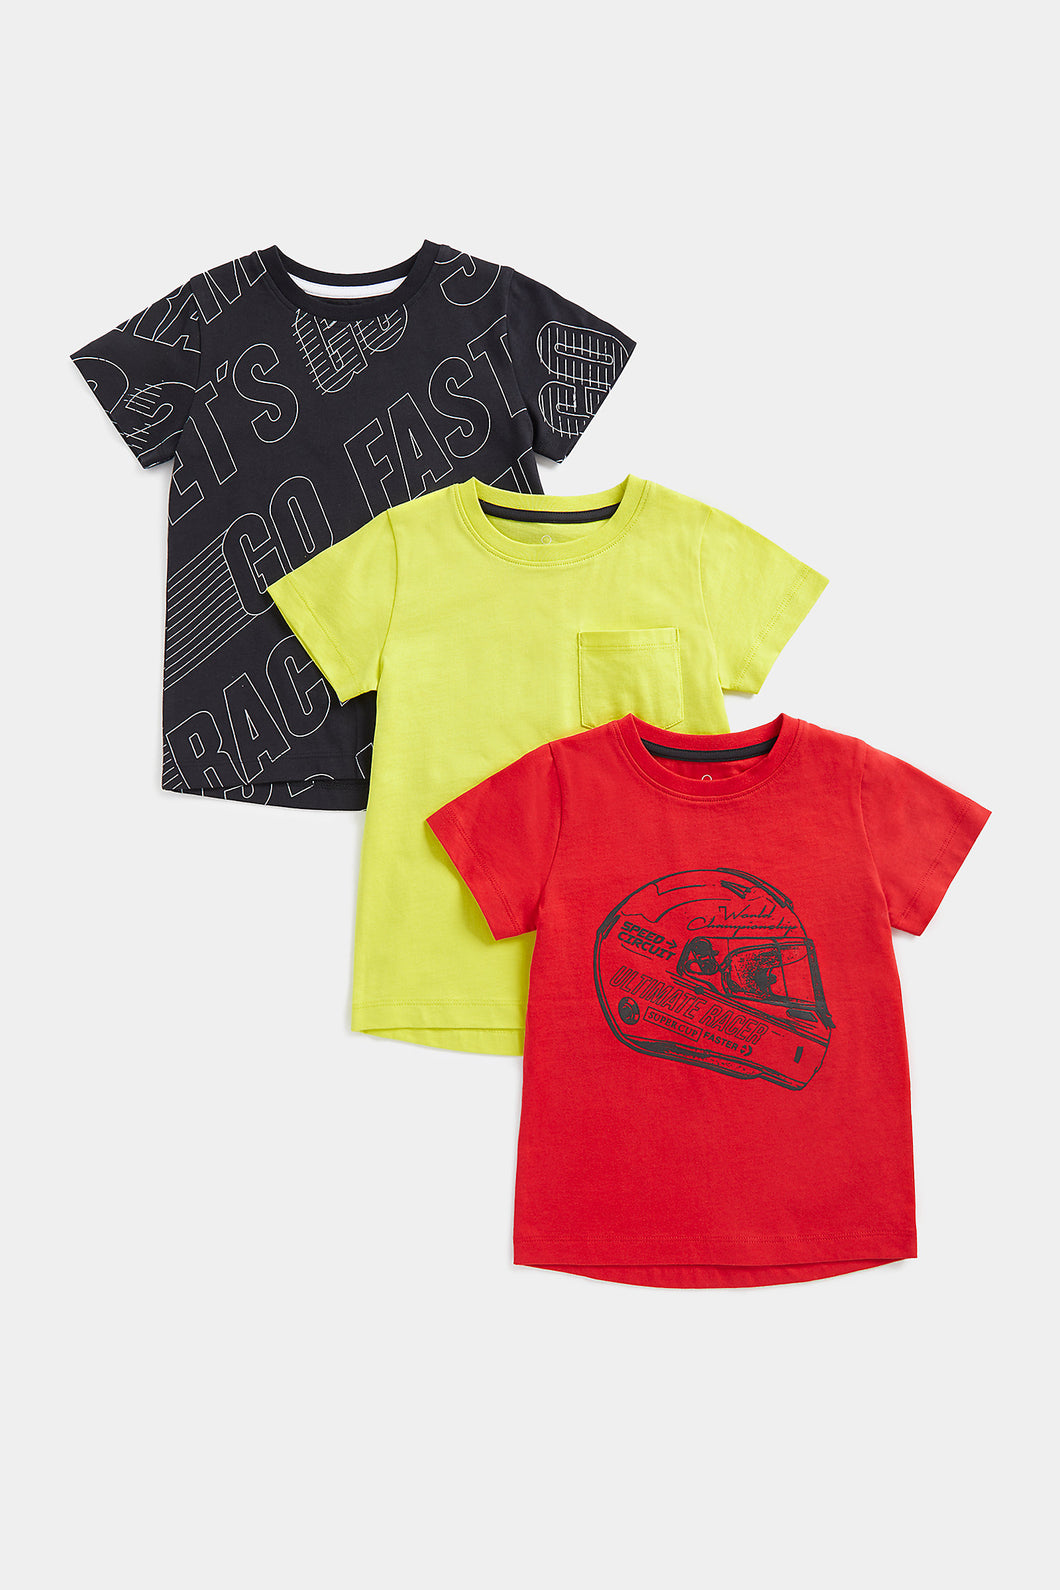 Mothercare Ultimate Racer T-Shirts - 3 Pack